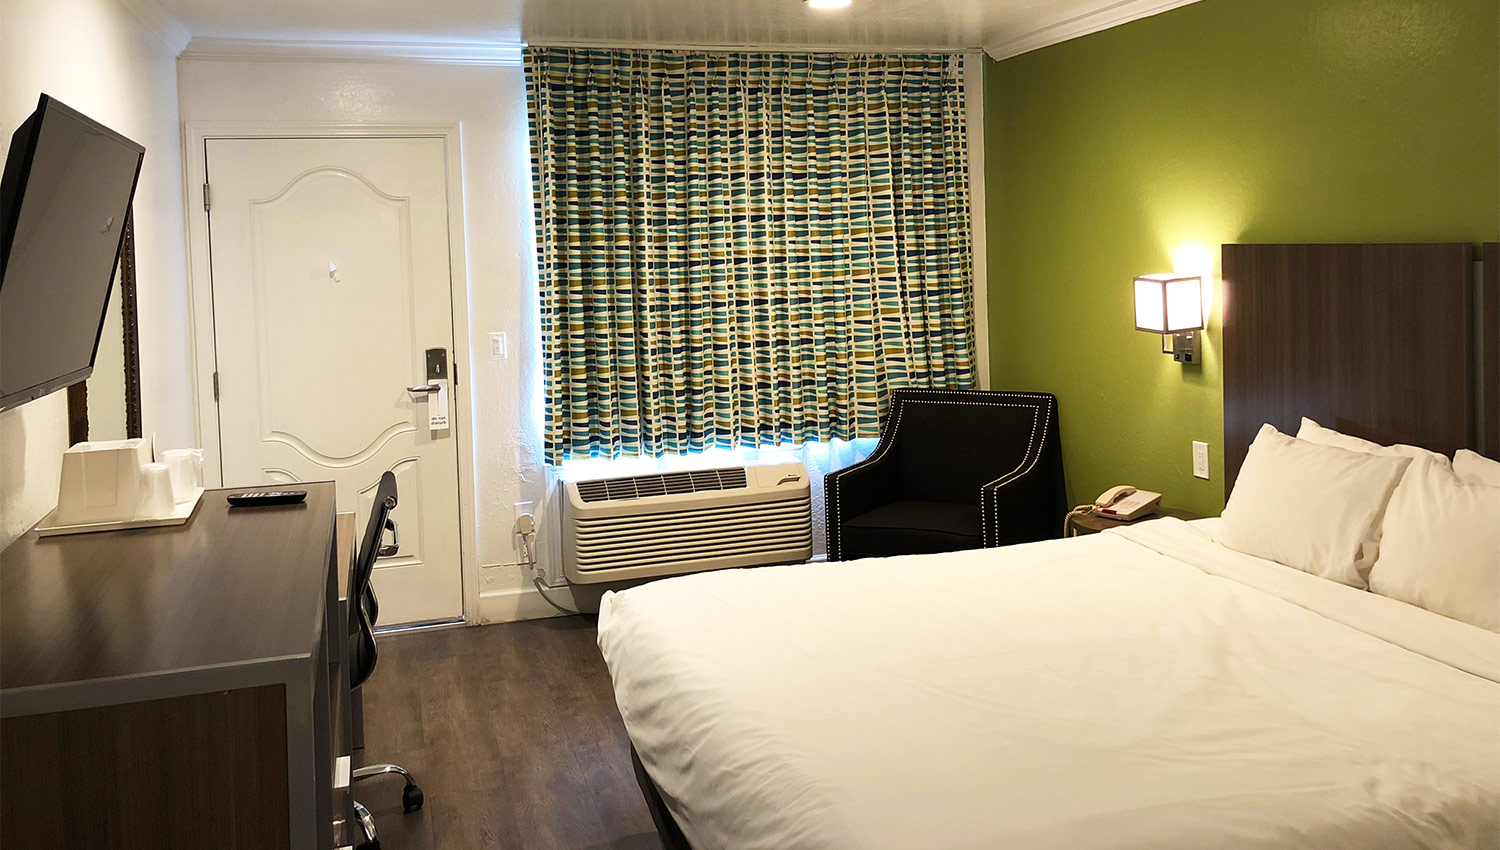 Gilroy Inn offers modern rooms that are perfect for business and leisure travelers